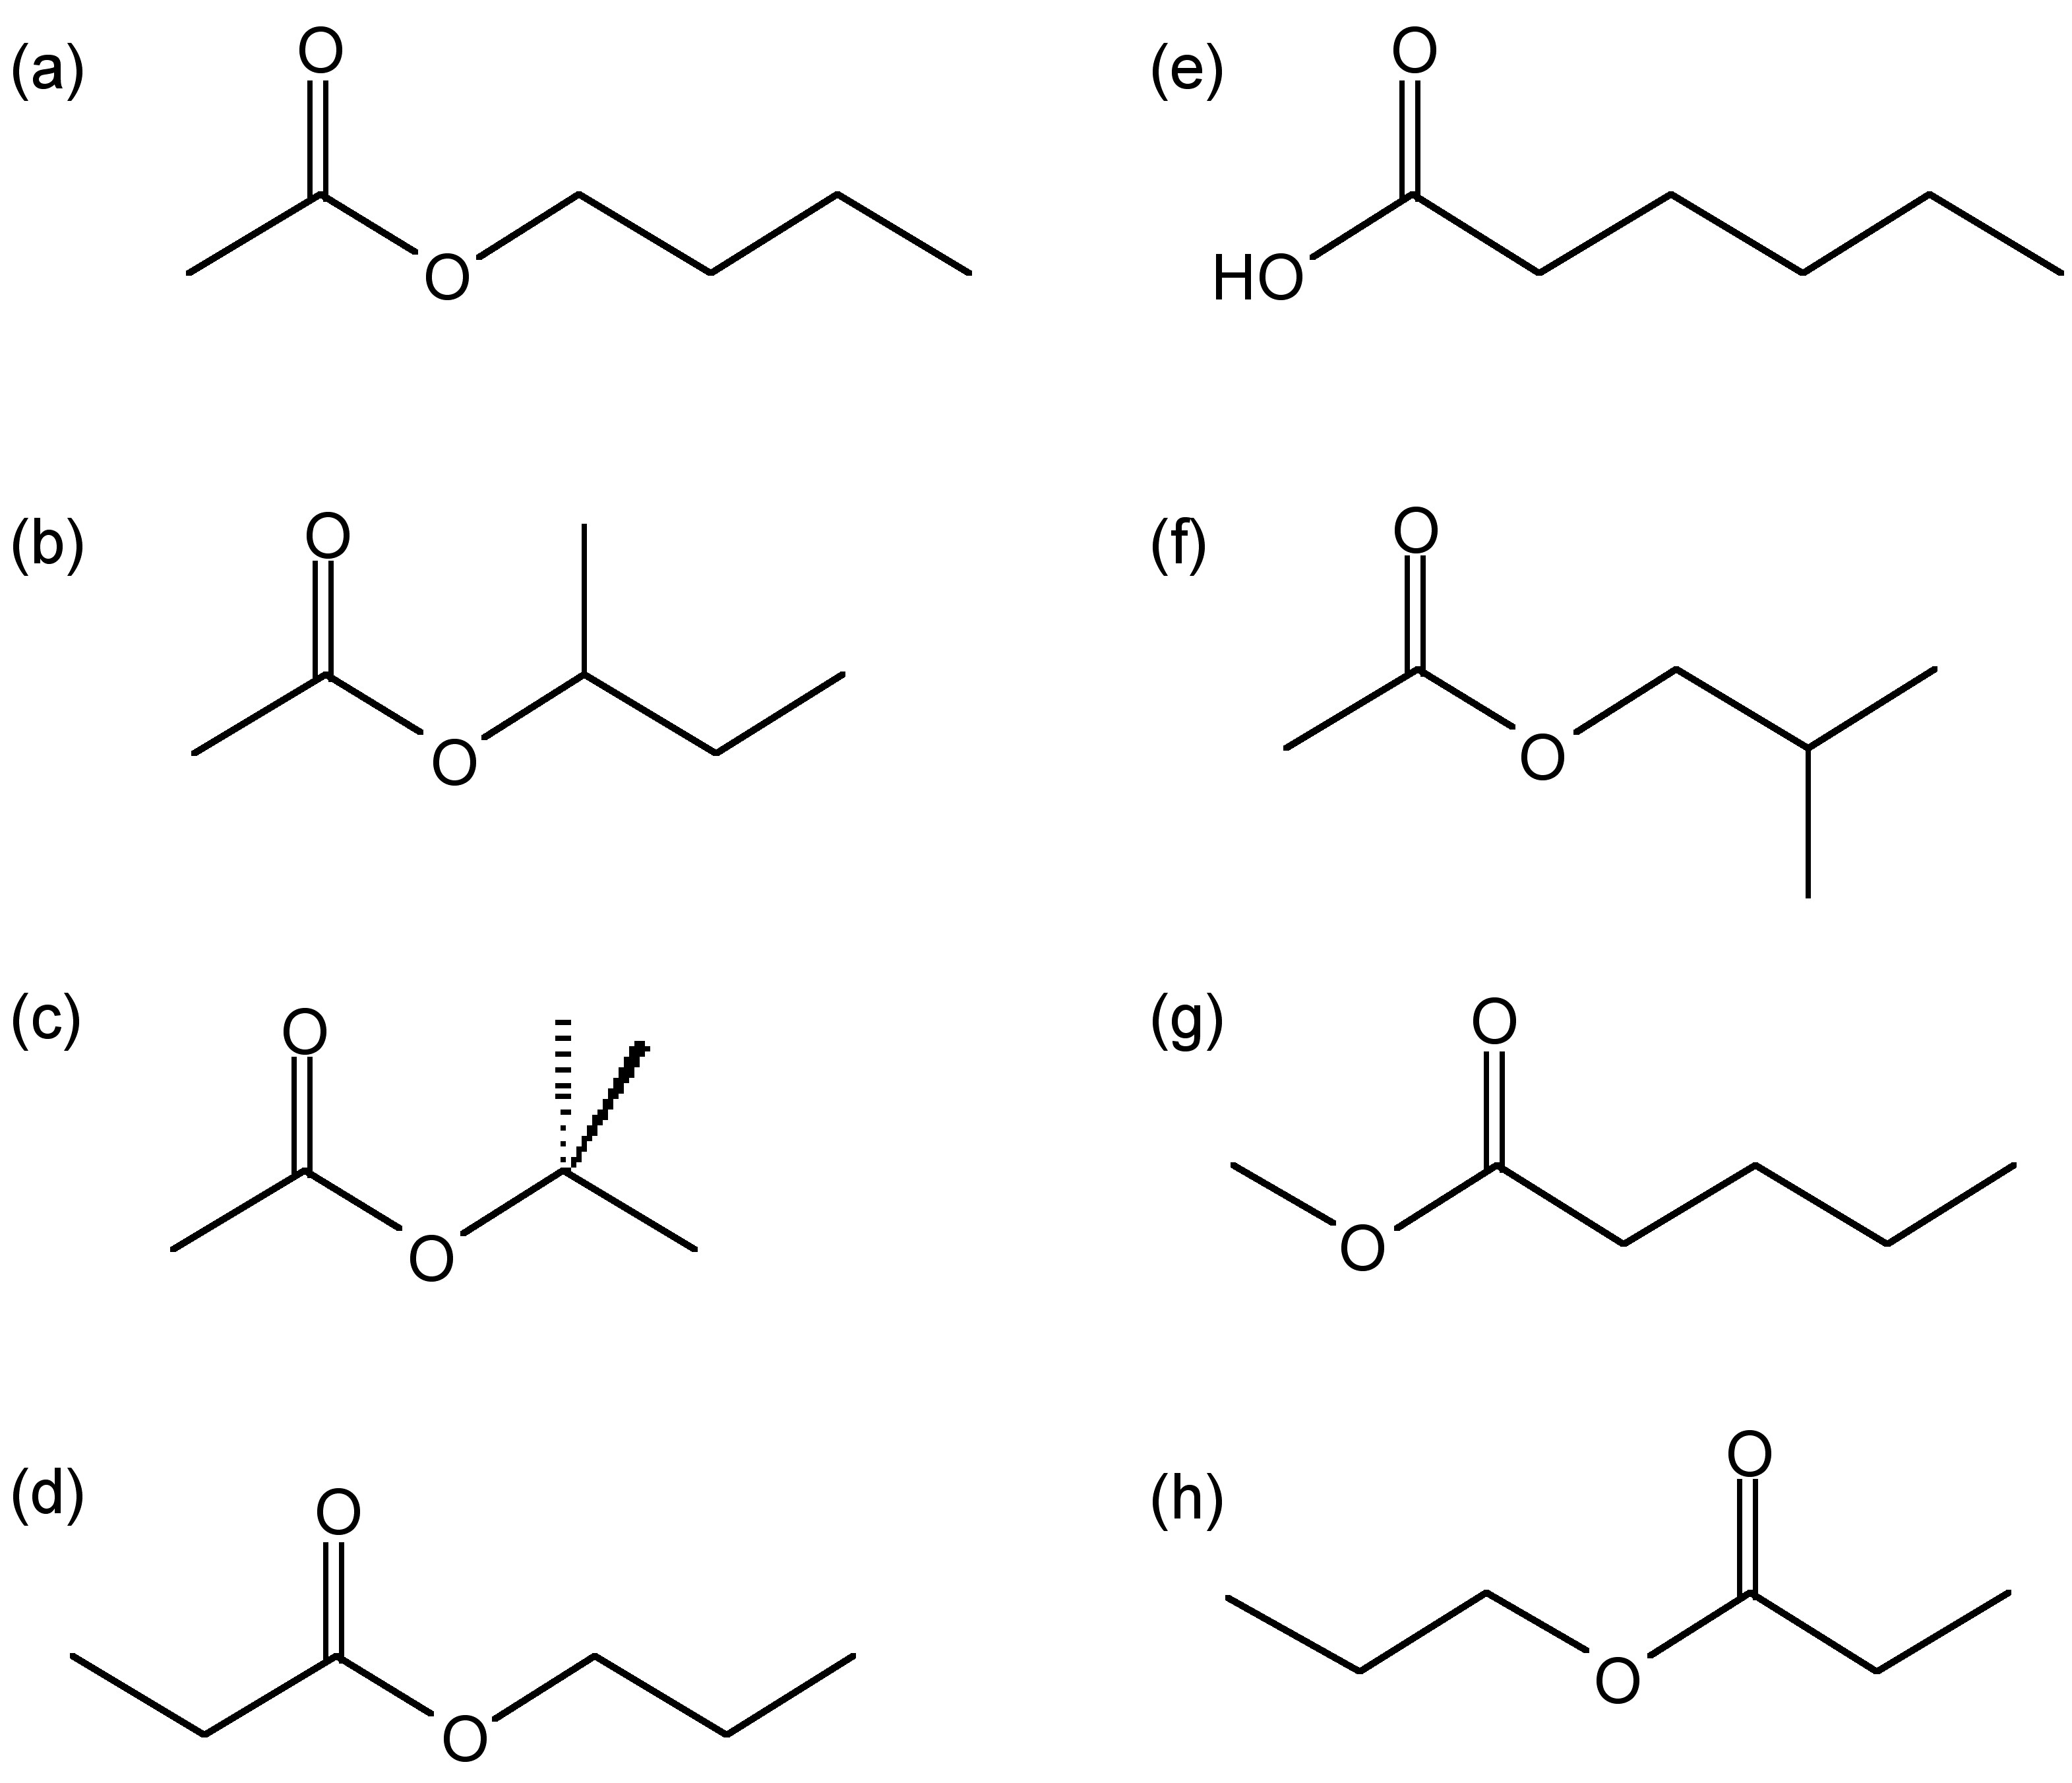 Structure of possible compounds with the molecular formula C6H12O2: (a) butylacetate, (b) sec-butyl acetate, (c) tert-butyl acetate, (d) ethyl butyrate, (e) haxanoic acid, (f) isobutyl acetate, (g) methyl pentanoate, and (h) propyl proponoate.